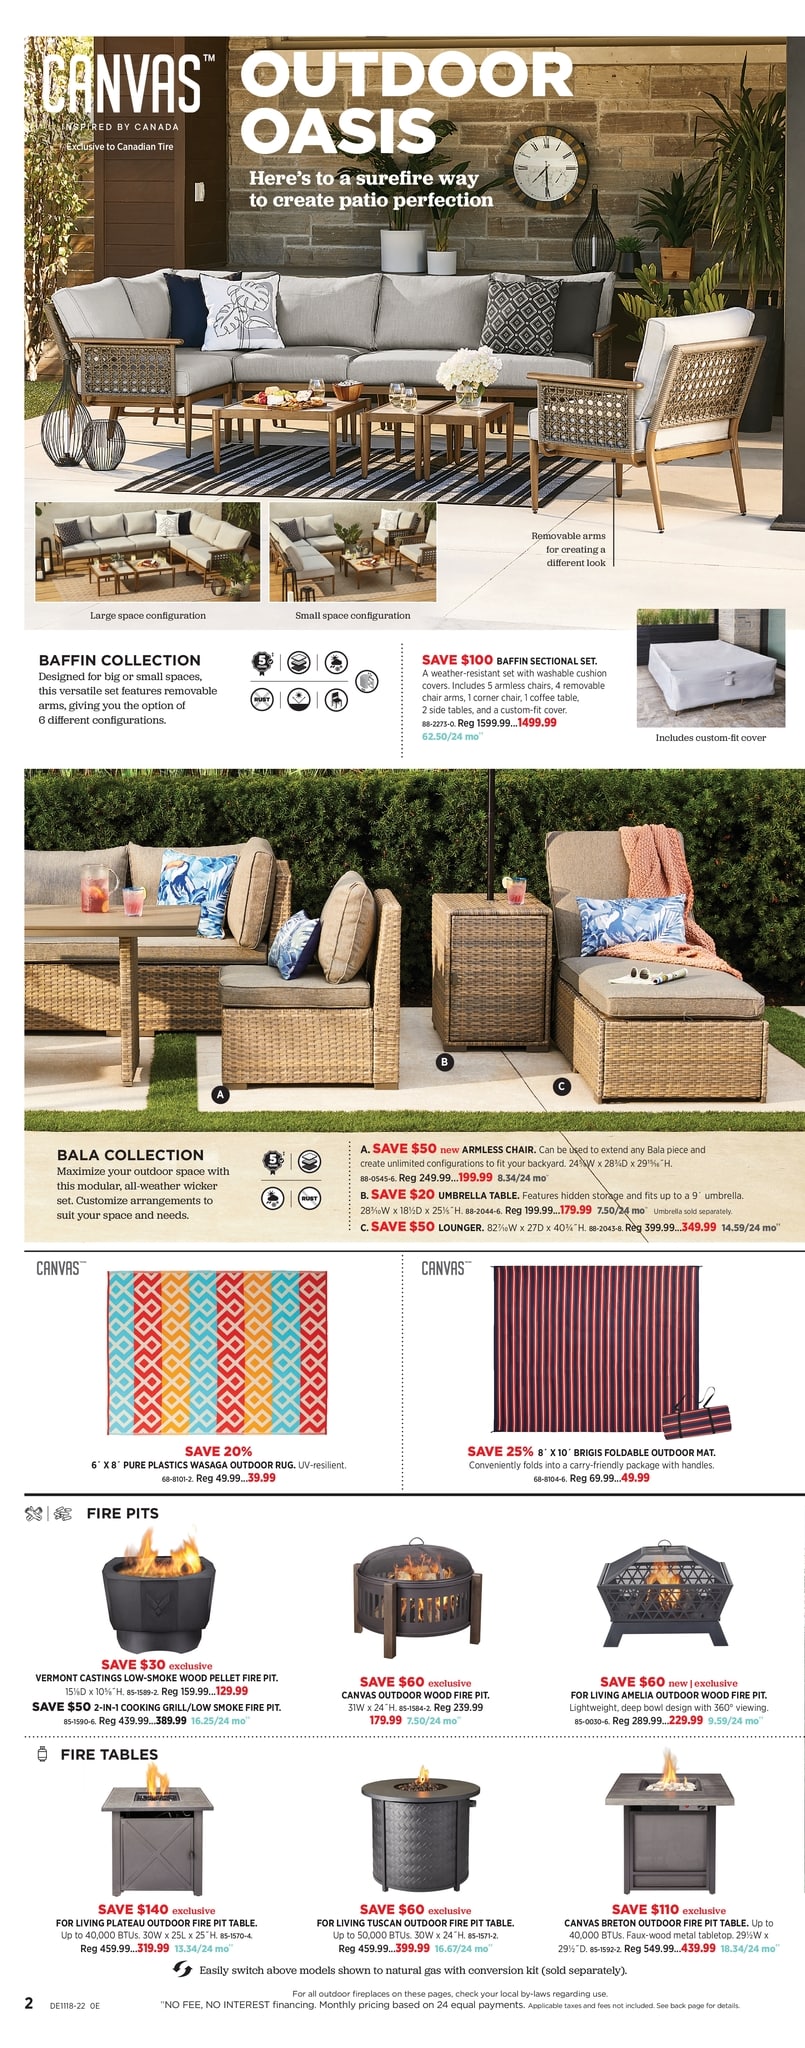 Canadian Tire - Spring Inspirations - Page 2